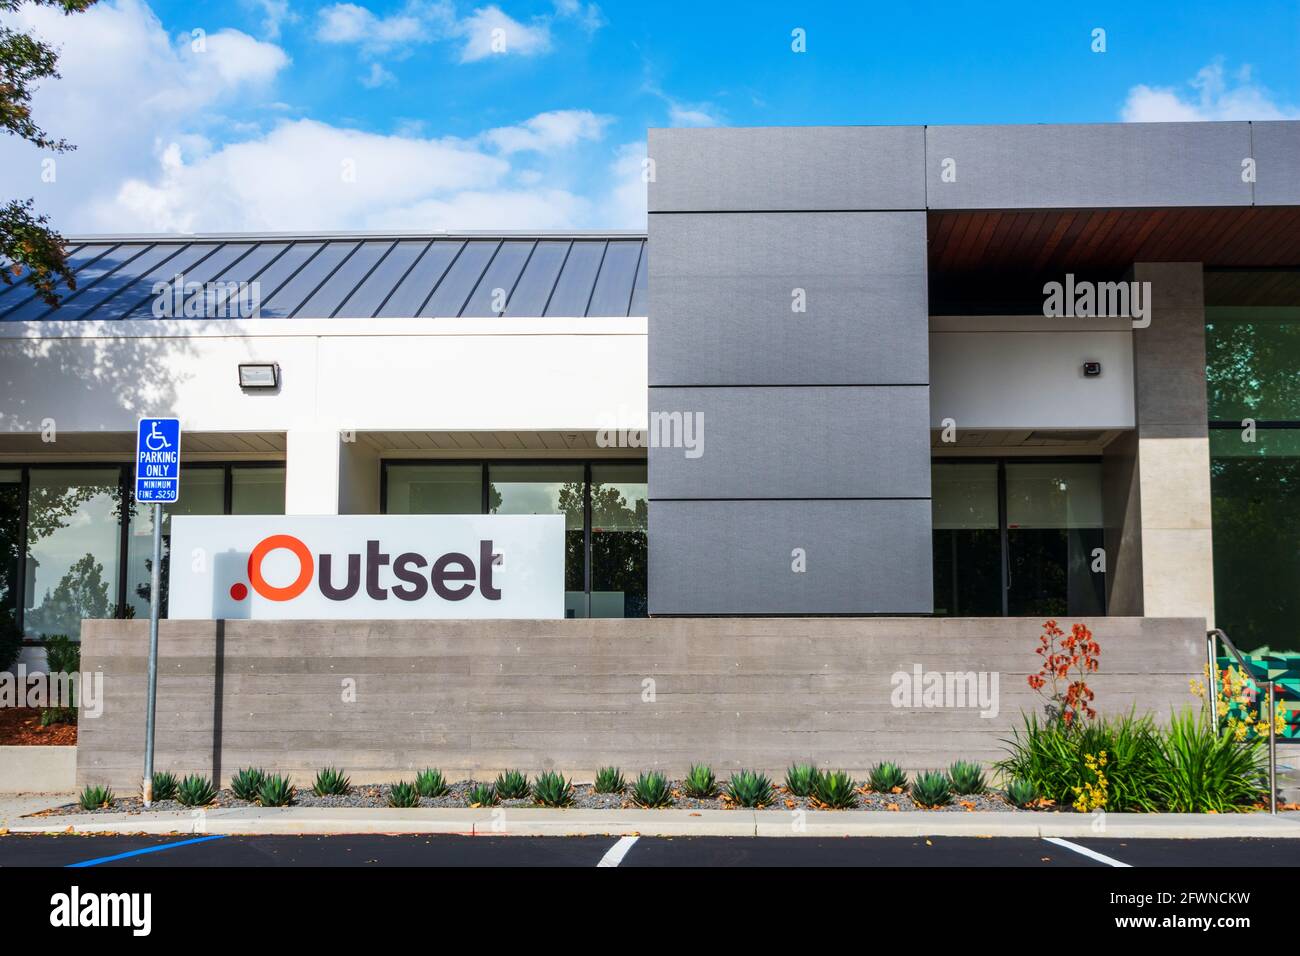 Outset sign logo on company headquarters. Outset Medical, Inc. develops a hemodialysis system for kidney patients - San Jose, California, USA - 2020 Stock Photo